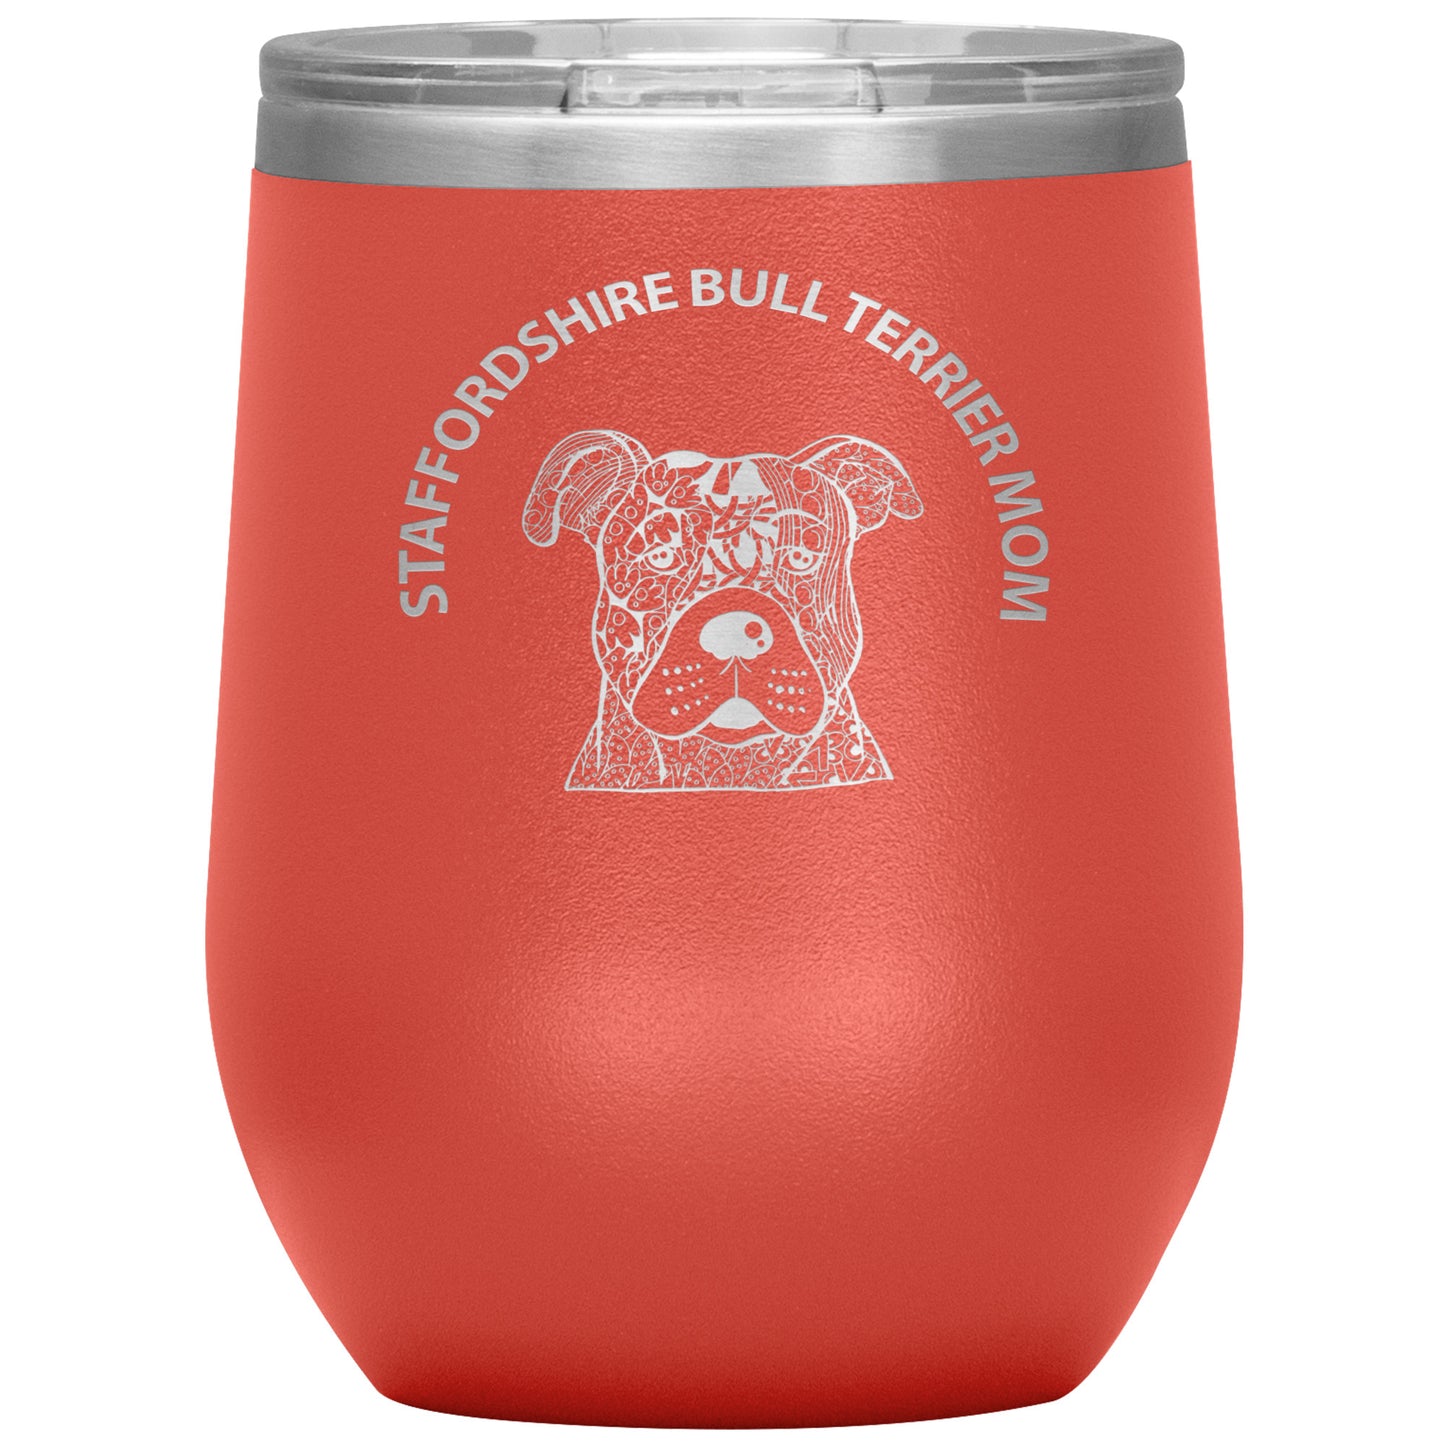 Staffordshire Bull Terrier (Staffie) Mom Design 12oz Insulated Stemless Wine Tumbler - Cindy Sang B&W